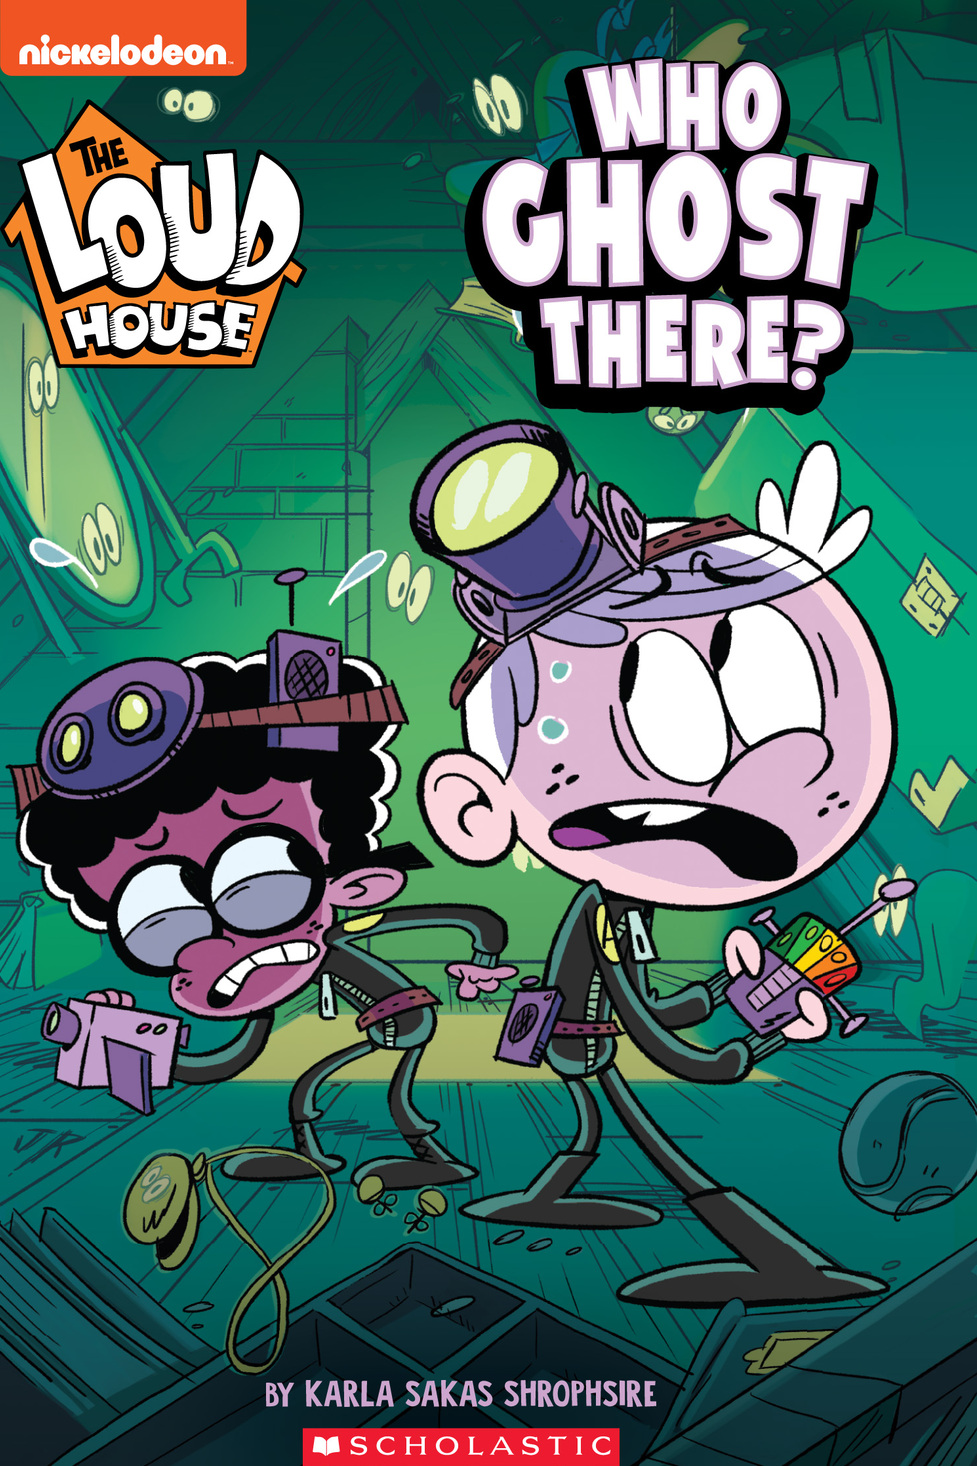 Who Ghost There? (The Loud House #1) - Kite and Kaboodle